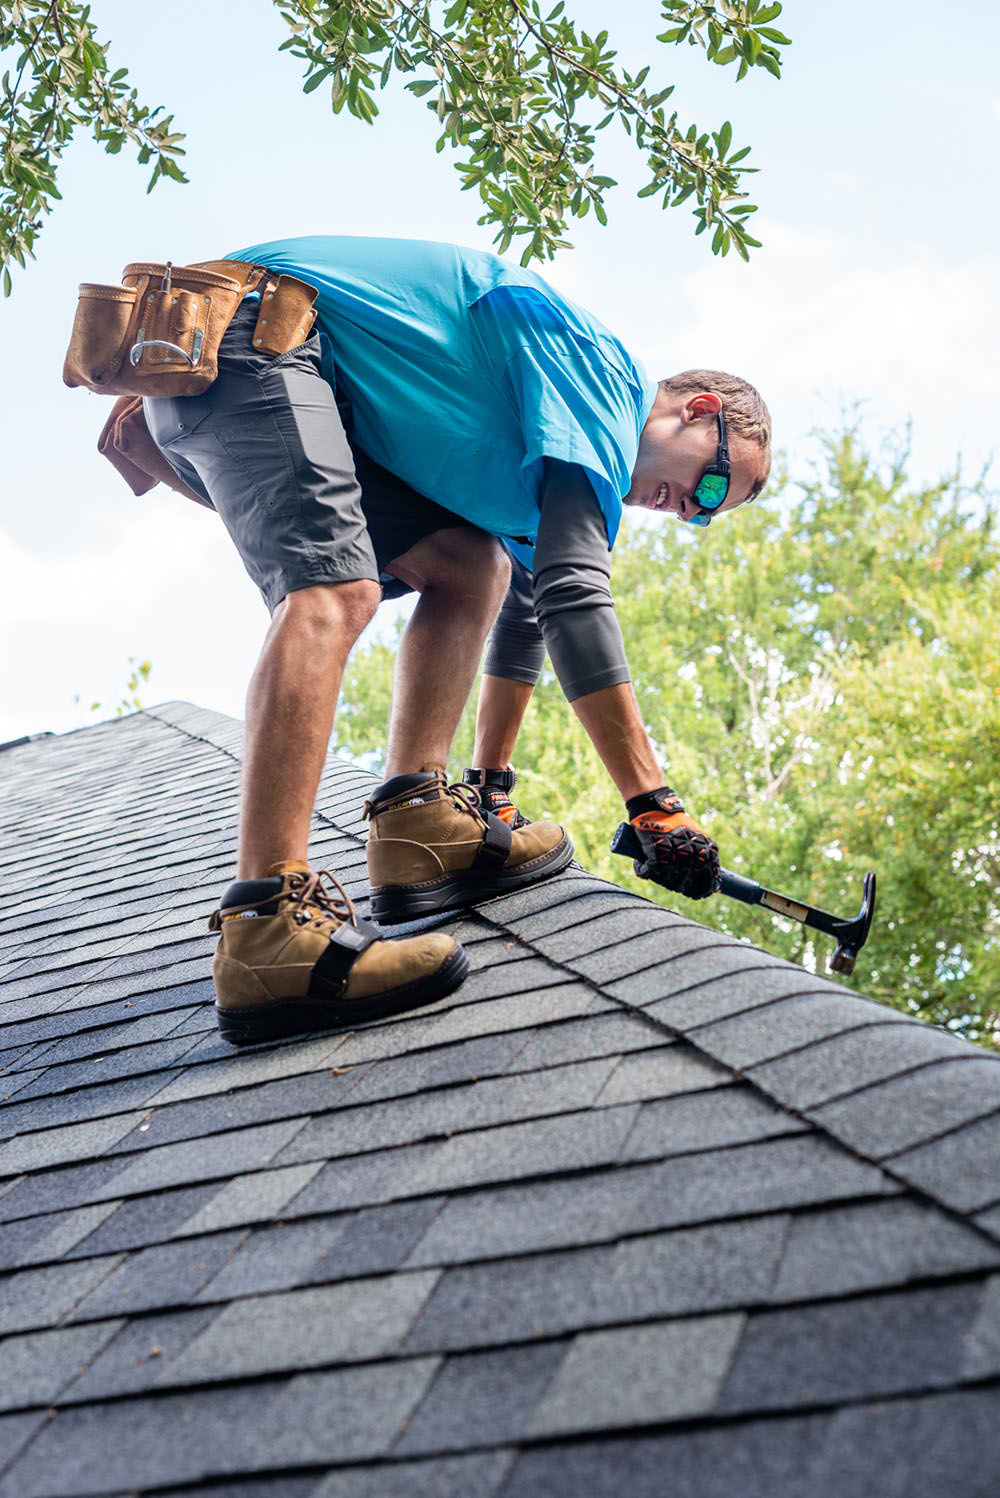 Lone Star Roofing & Gutters